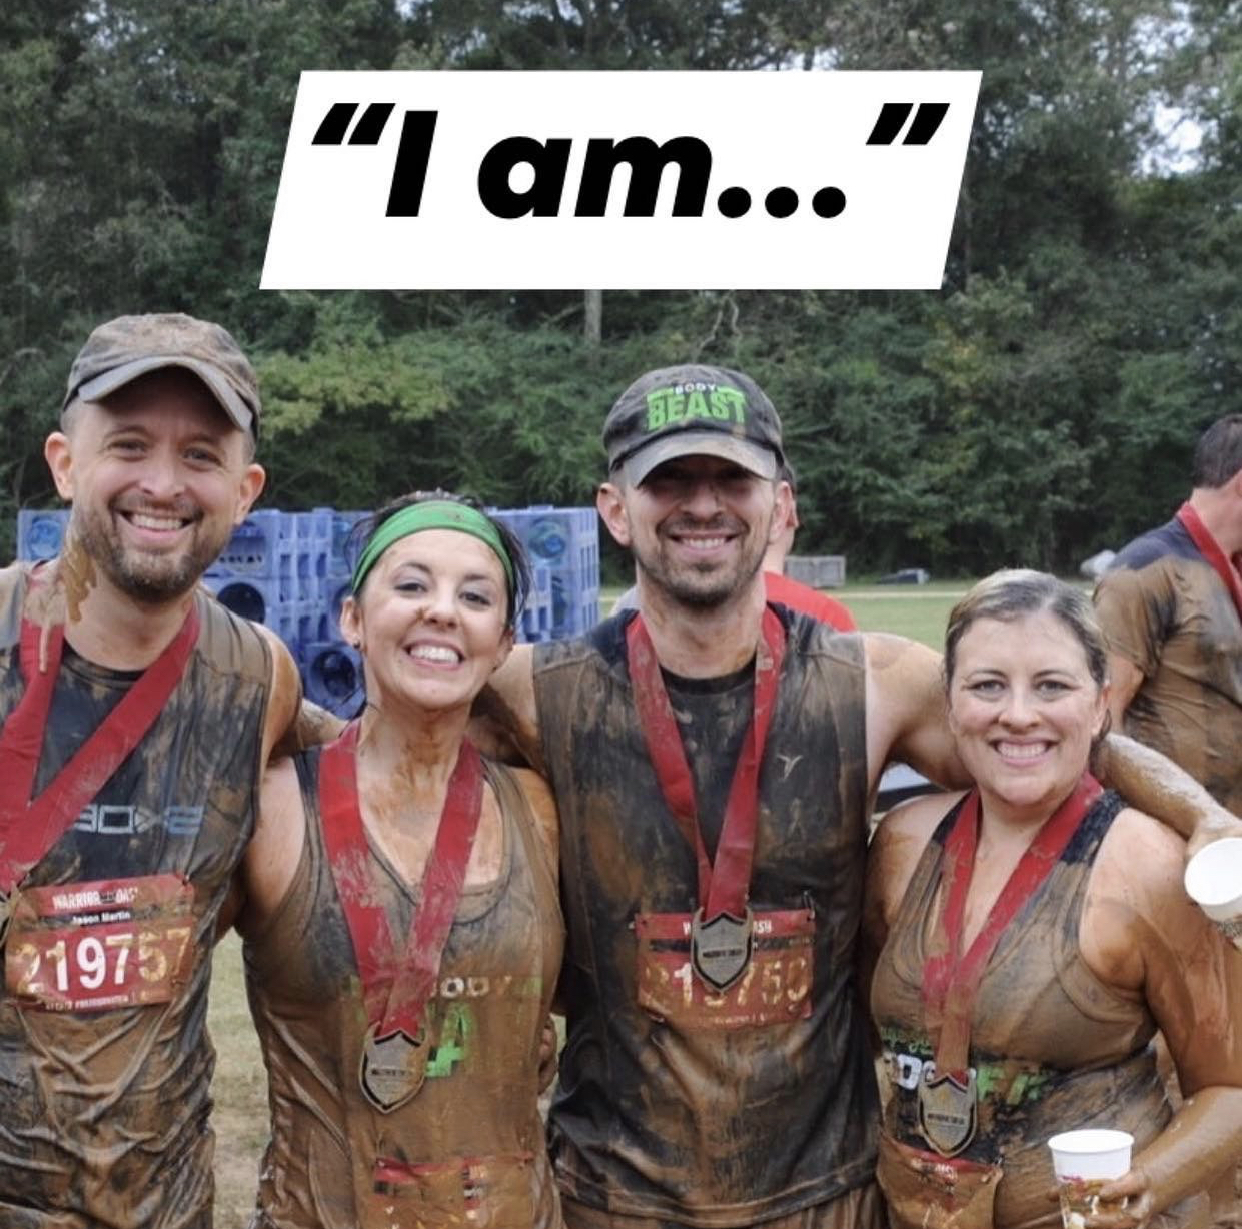 Two men and two women wearing medals and covered in mud from obstacle course Warrior Dash